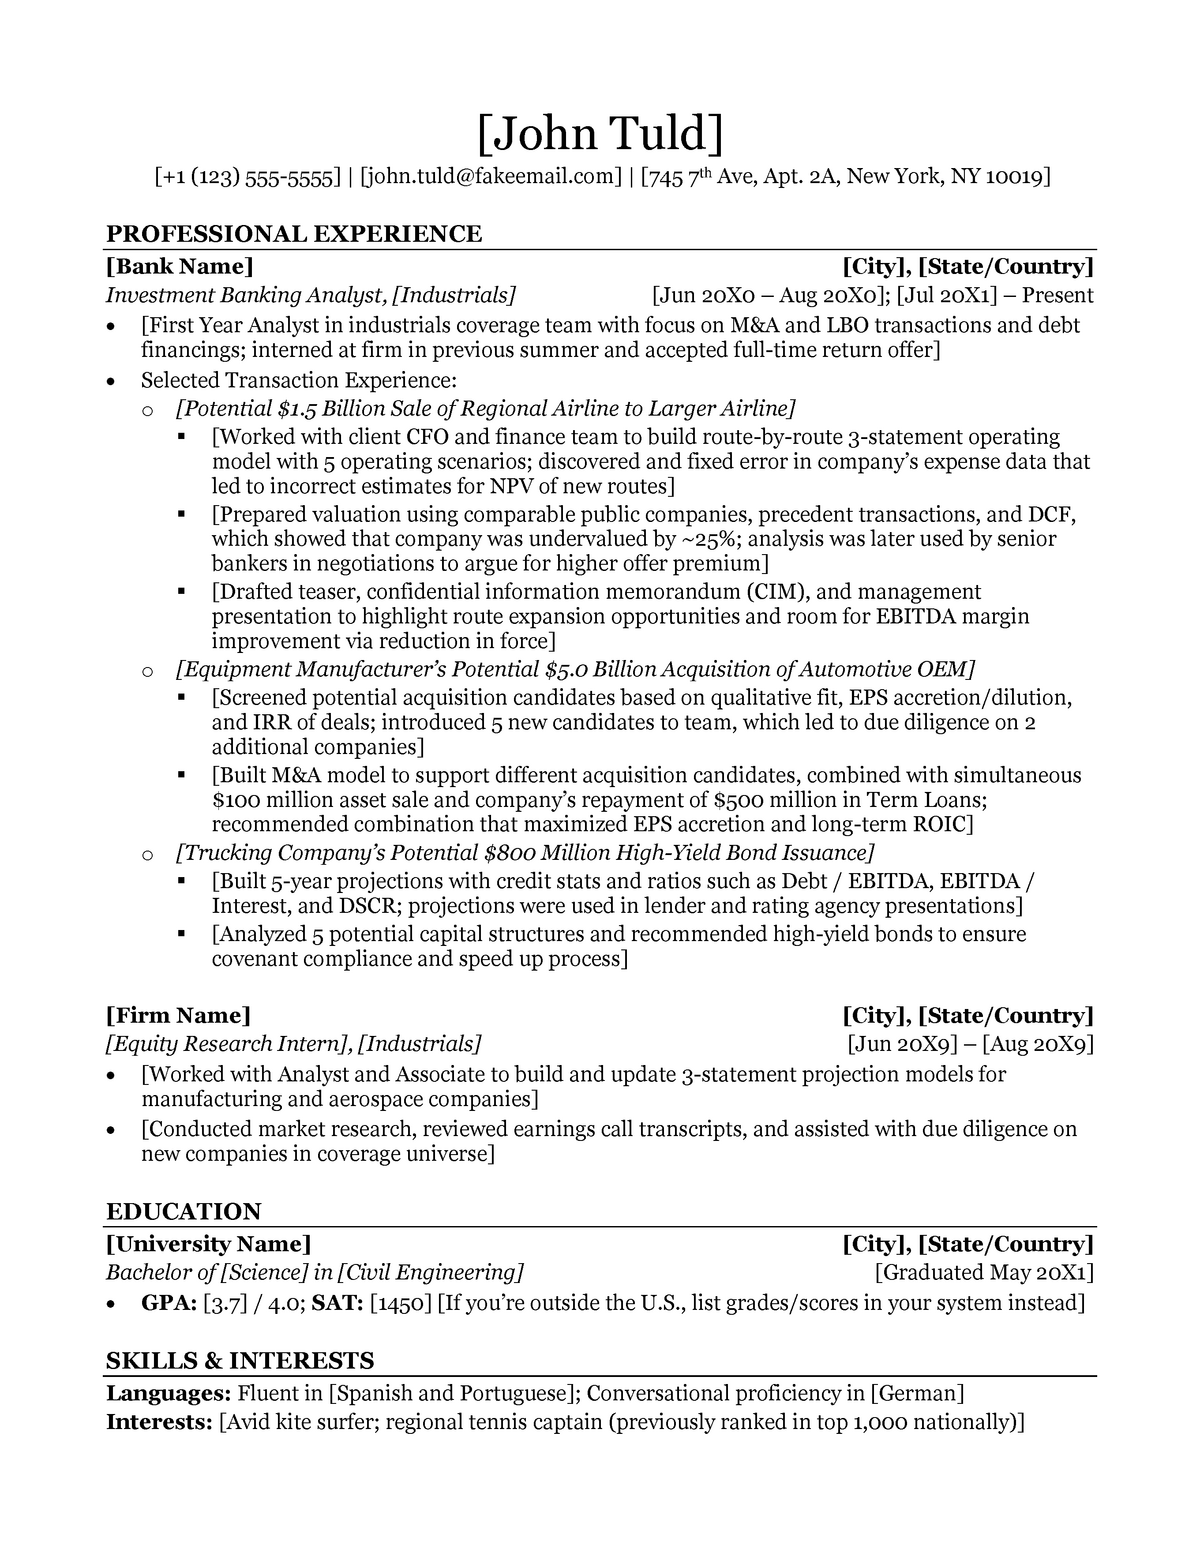 private-equity-resume-template-from-investment-banking-warning-tt-undefined-function-32